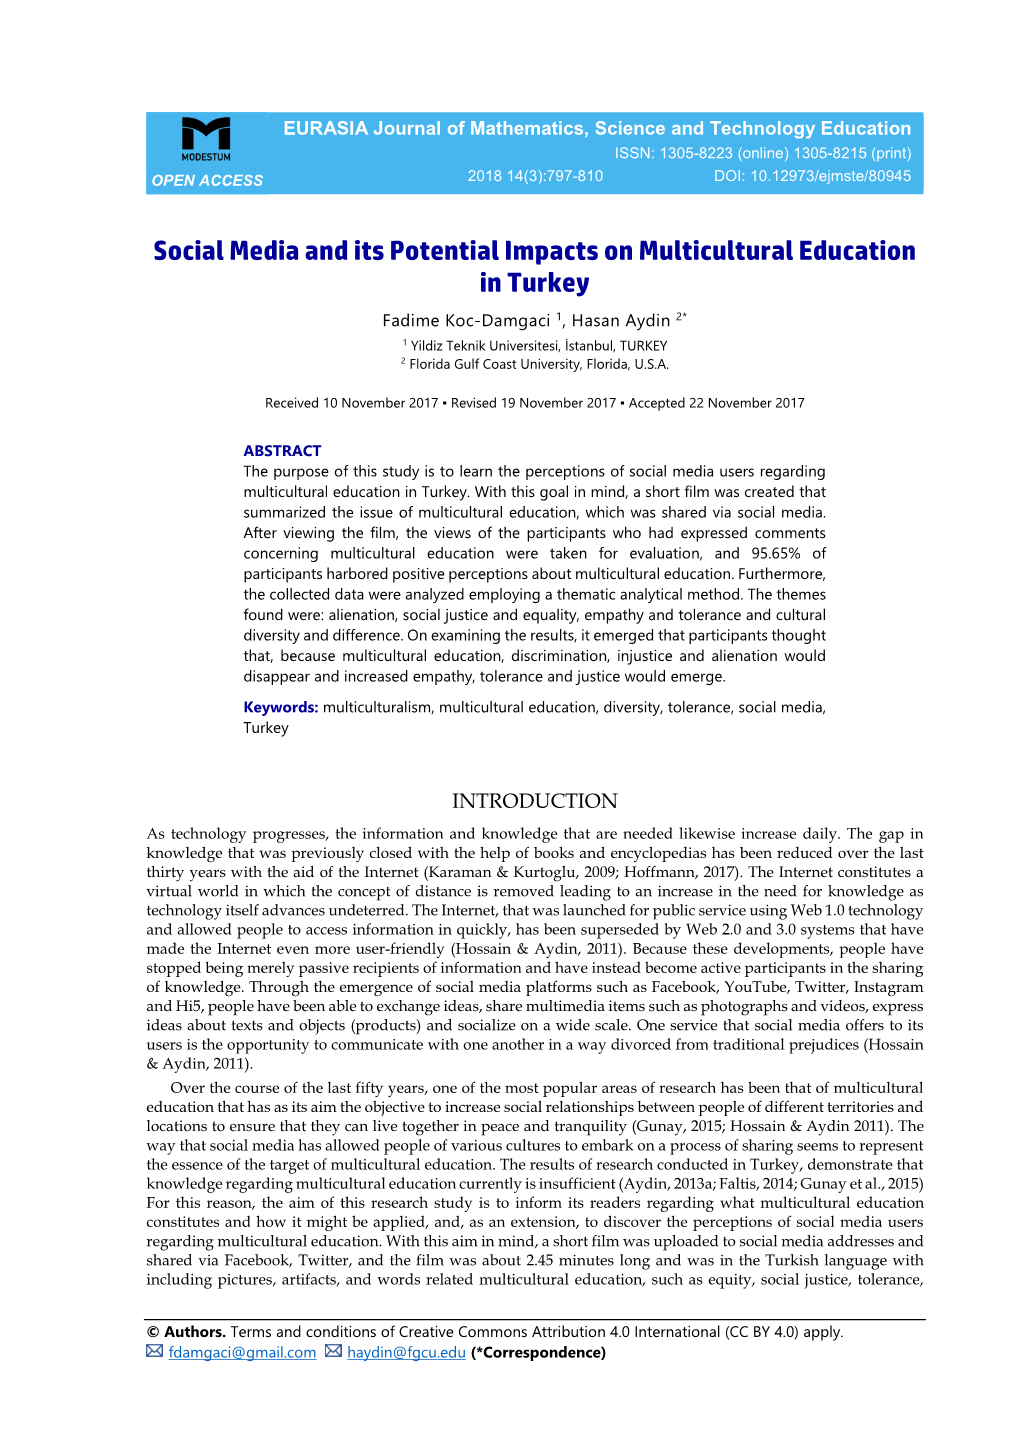 Social Media and Its Potential Impacts on Multicultural Education in Turkey